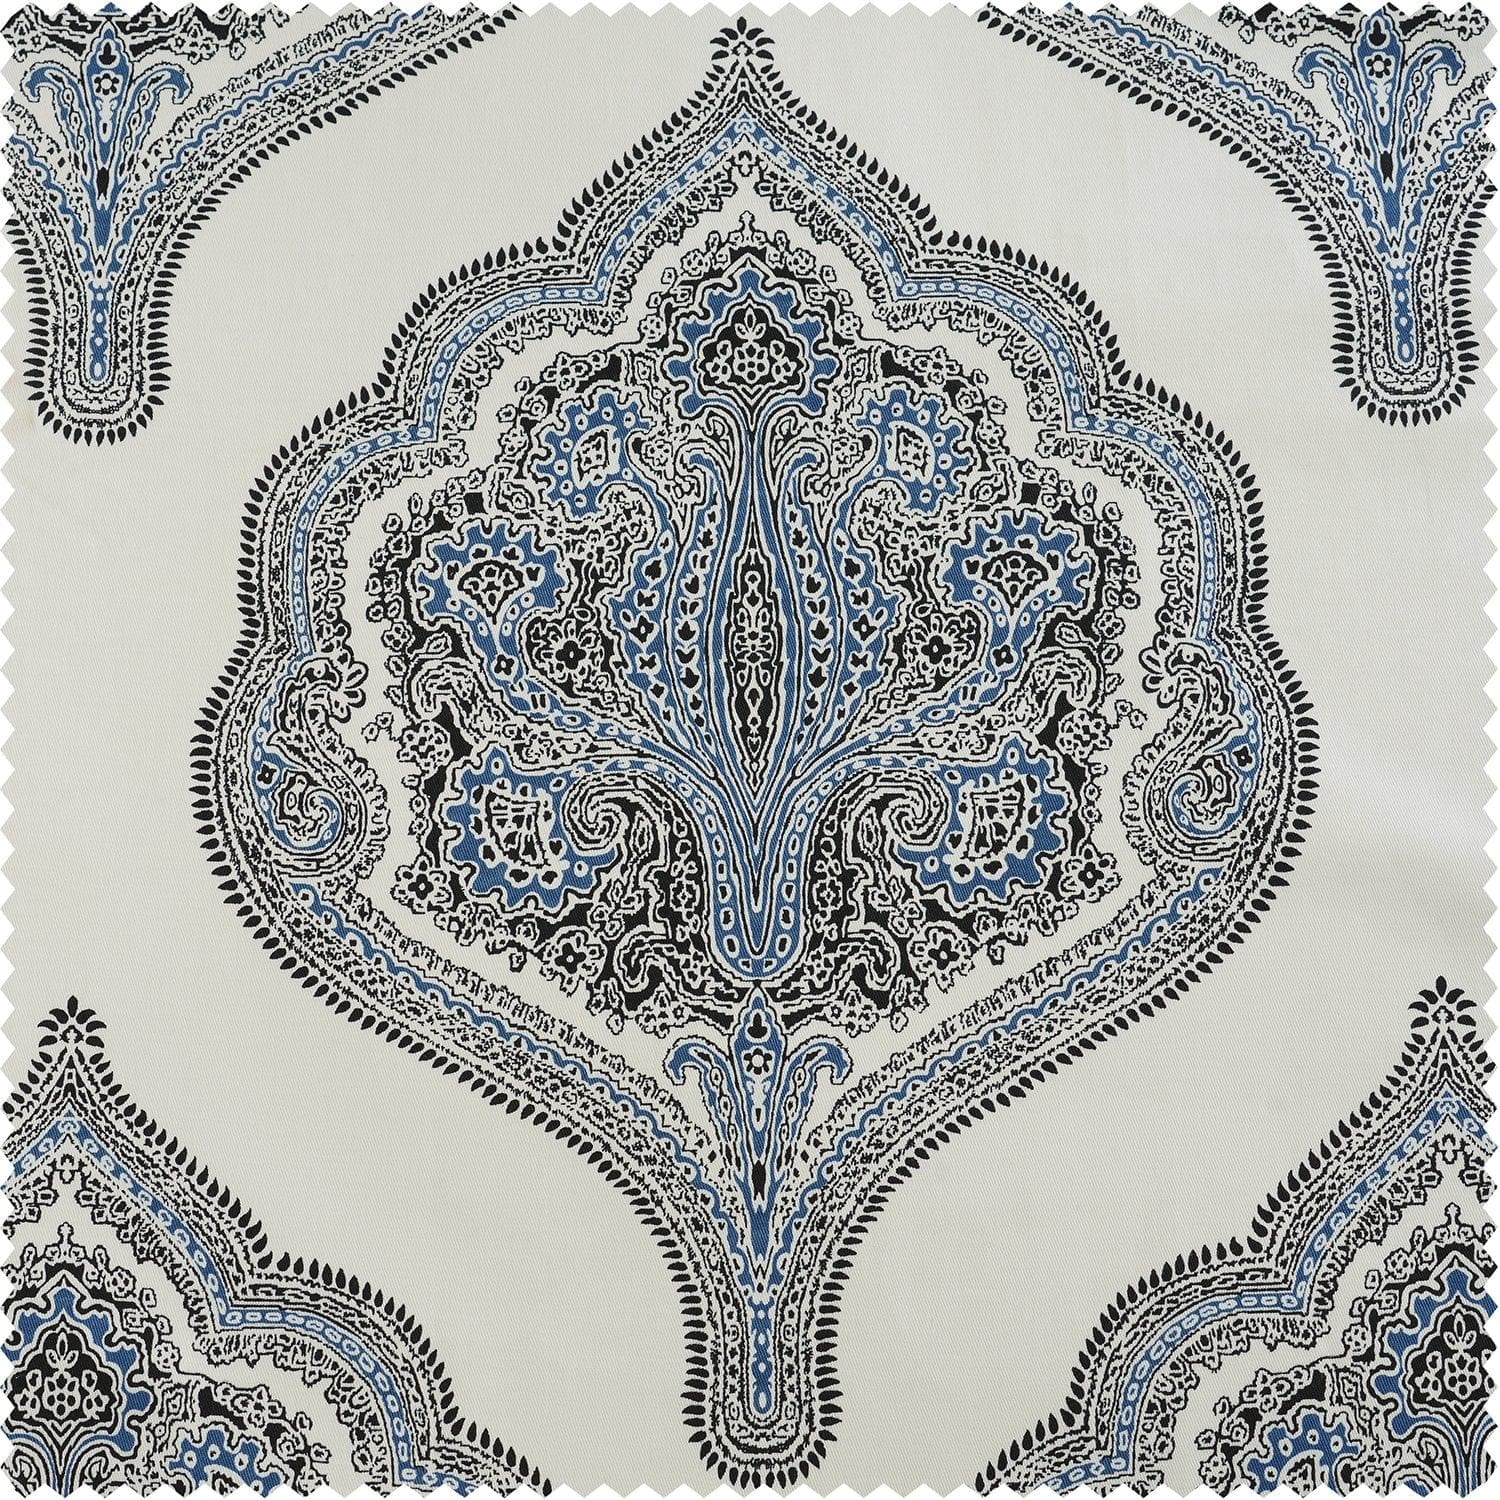 Arabesque Blue French Pleat Printed Cotton Curtain